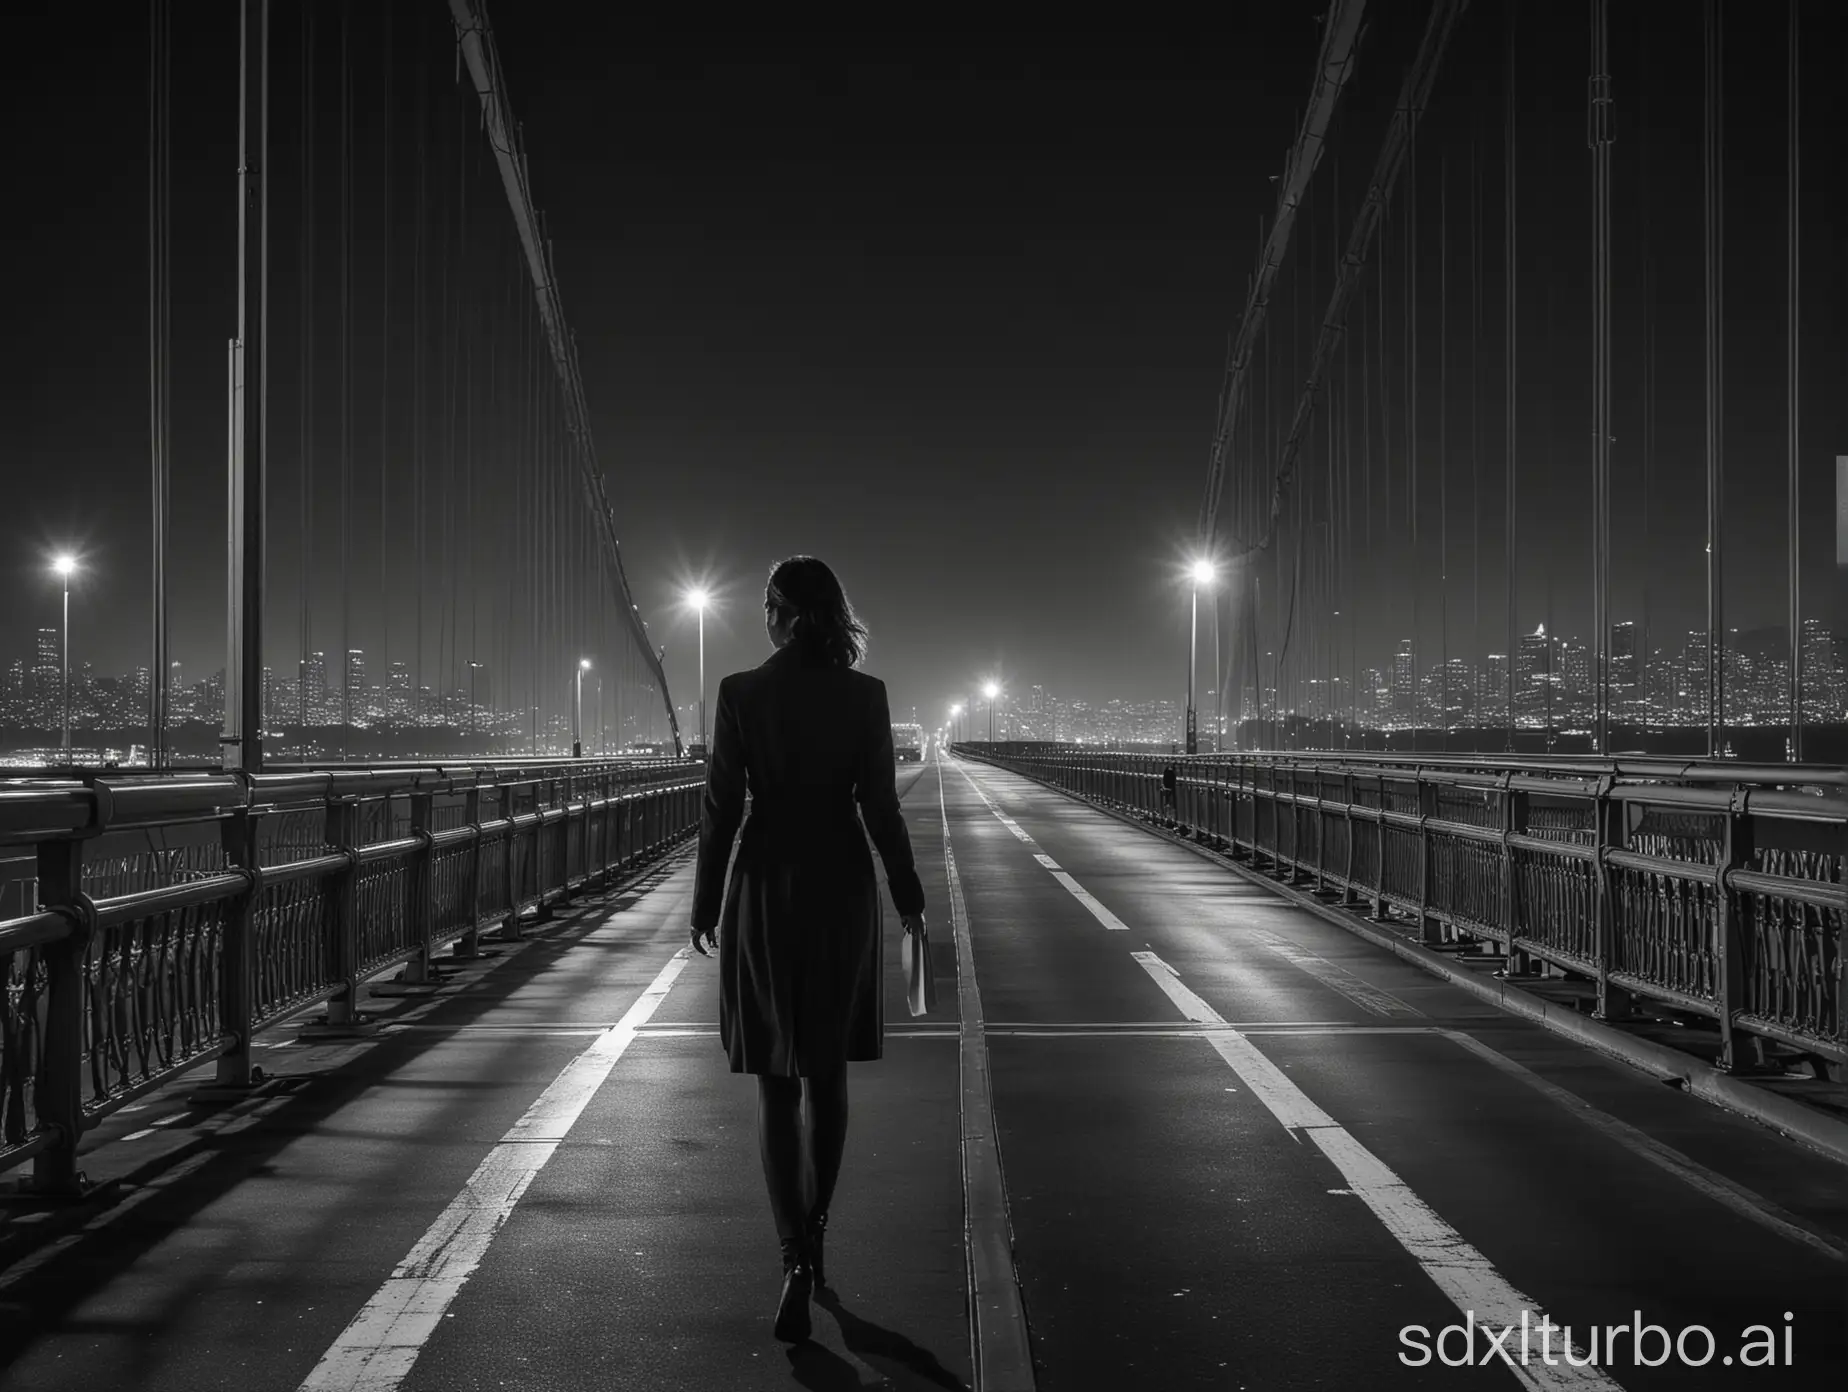 a lonely woman crossing san francico bridge at night, high contrast black and white photoc, masterpiece, drmatic lighting, goggy atmosphere